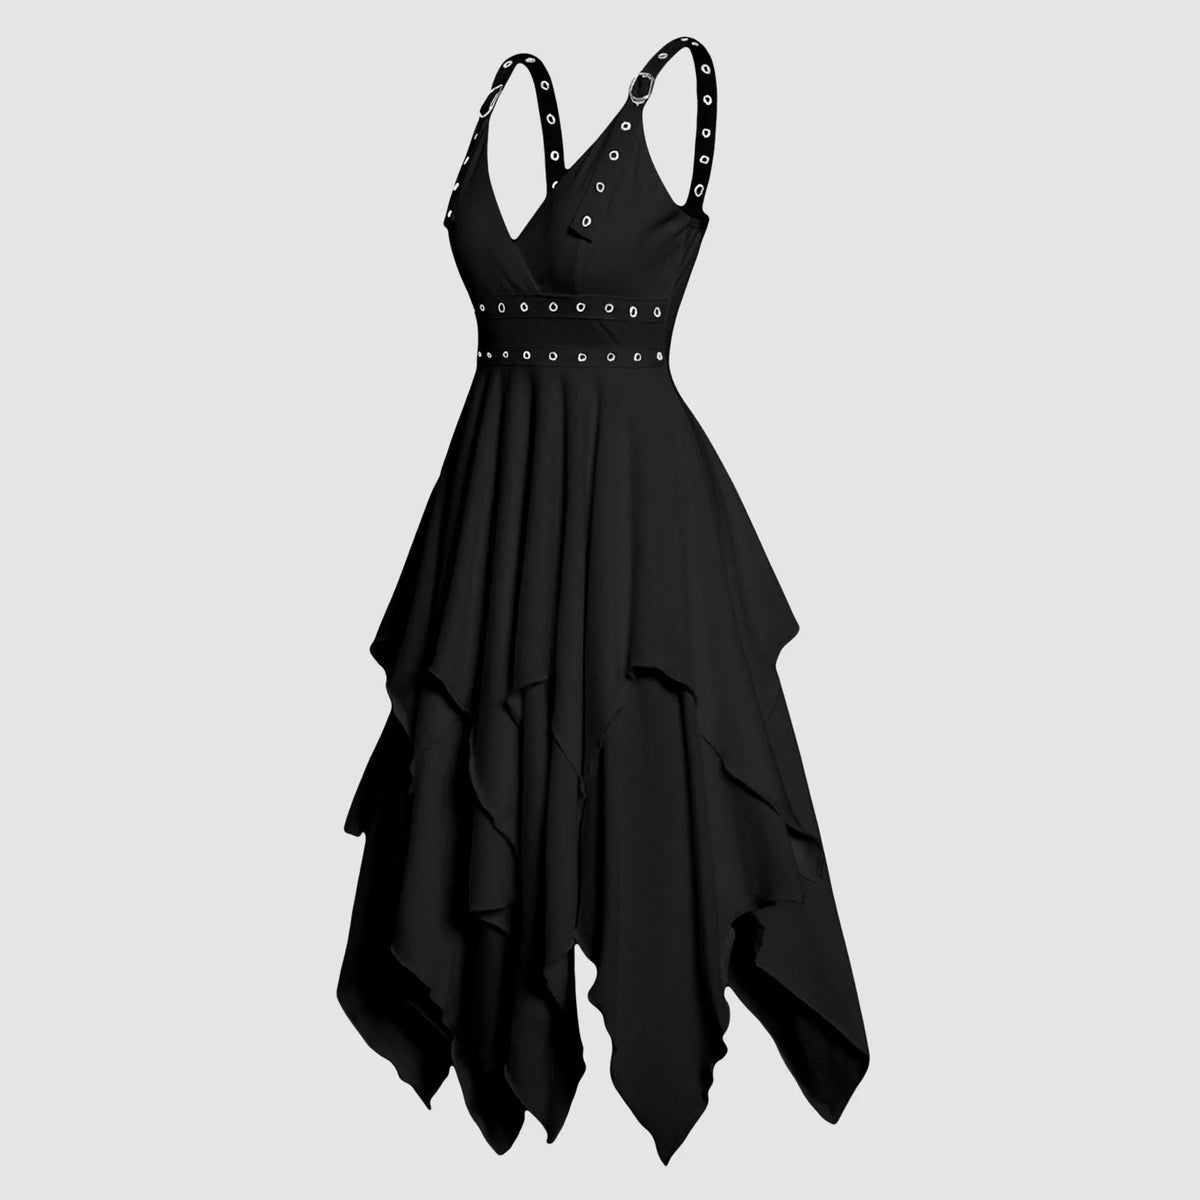 Women’s Gothic Vintage Dress - Solid Color Halloween Cosplay Costume with Irregular Sleeves and Layered Straps